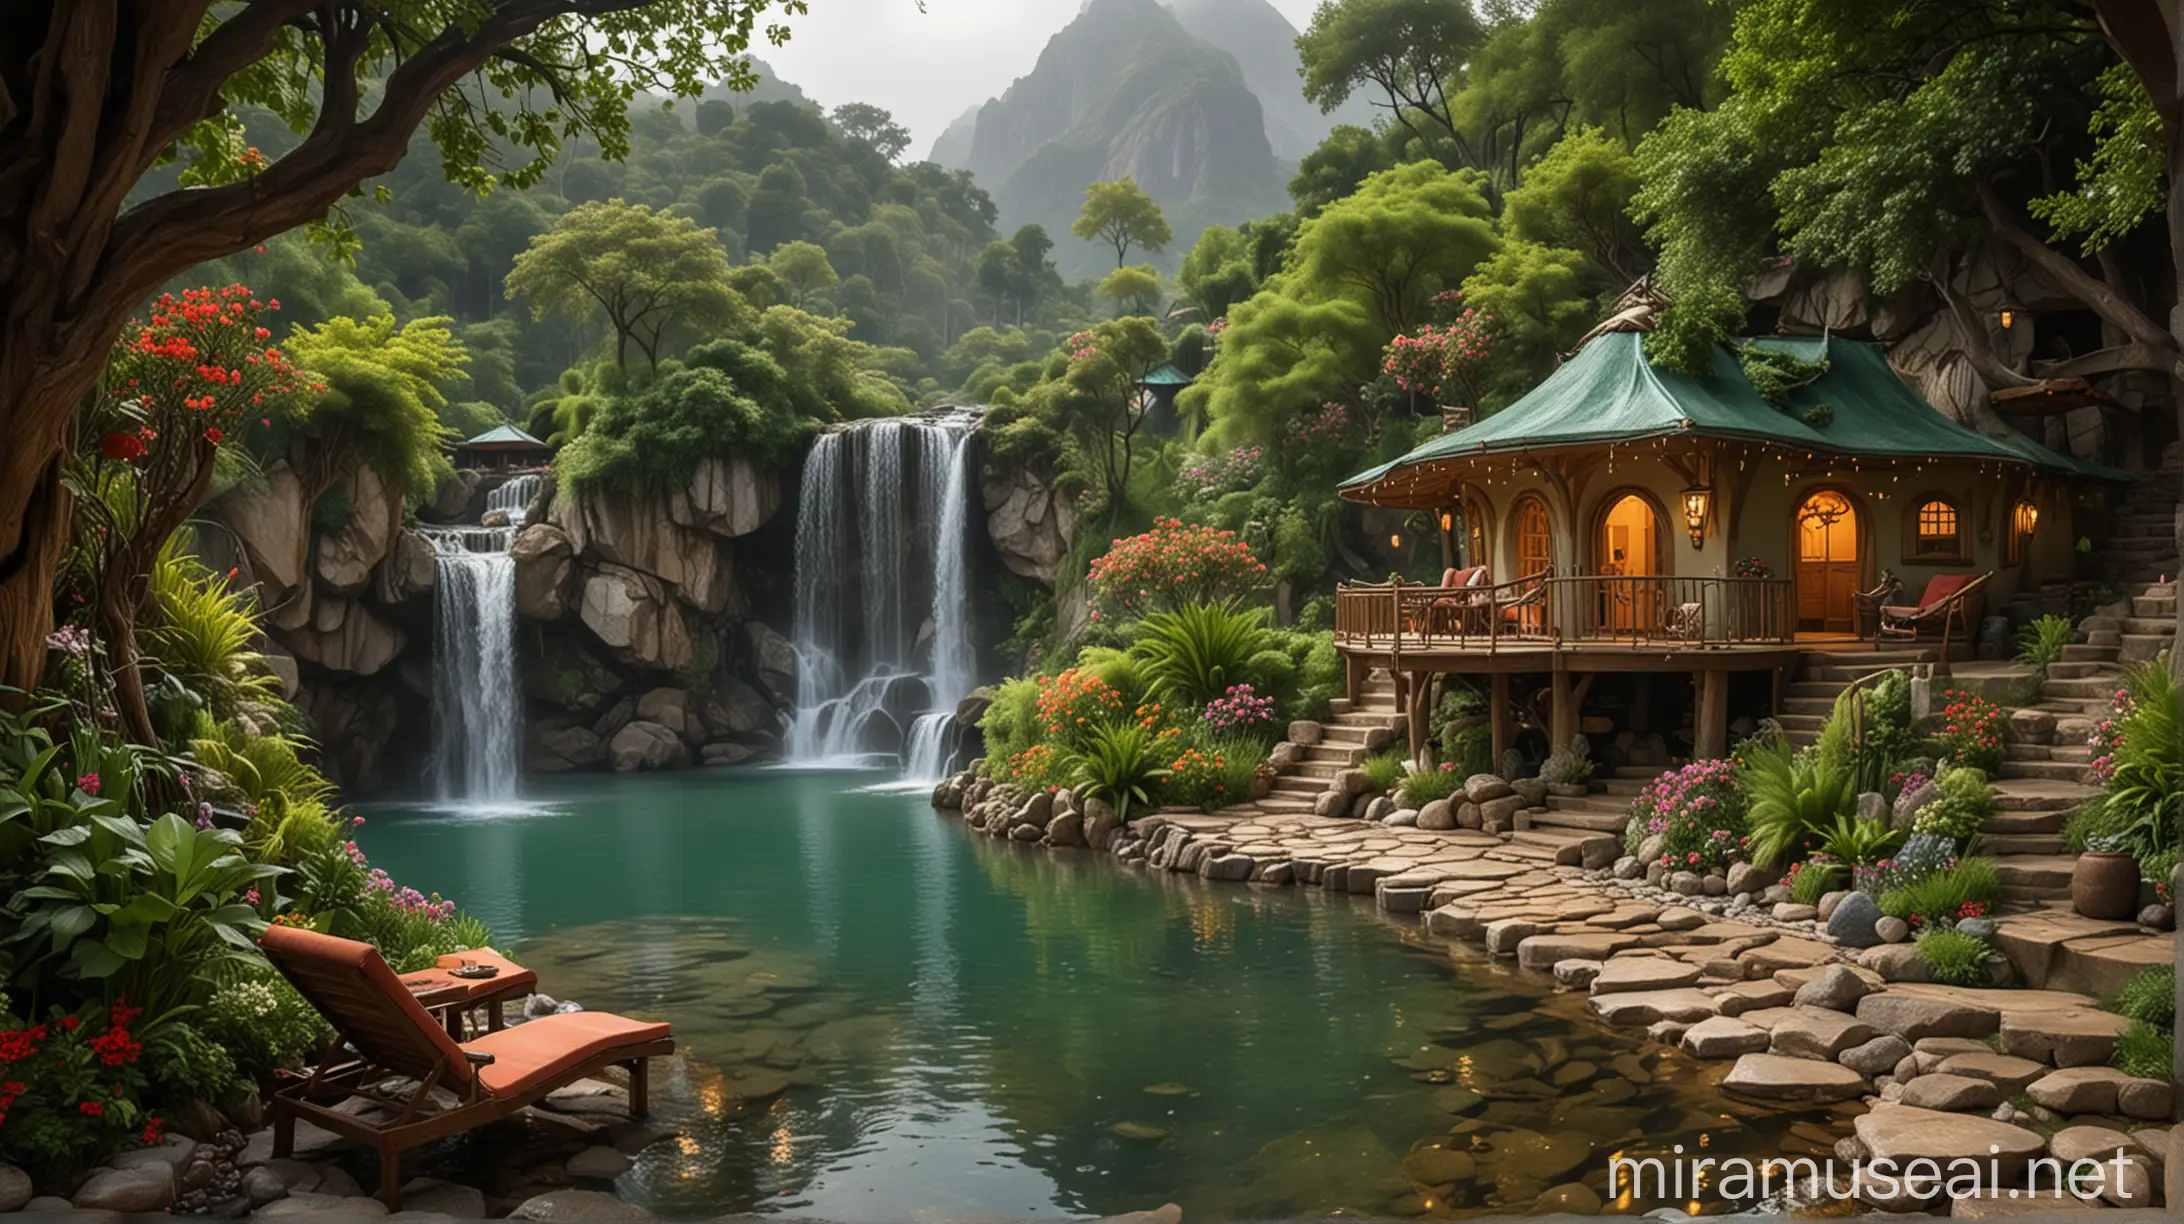 Waterfall Mountain Hobbit House Interior View Golden Adornments and Crystal Waters